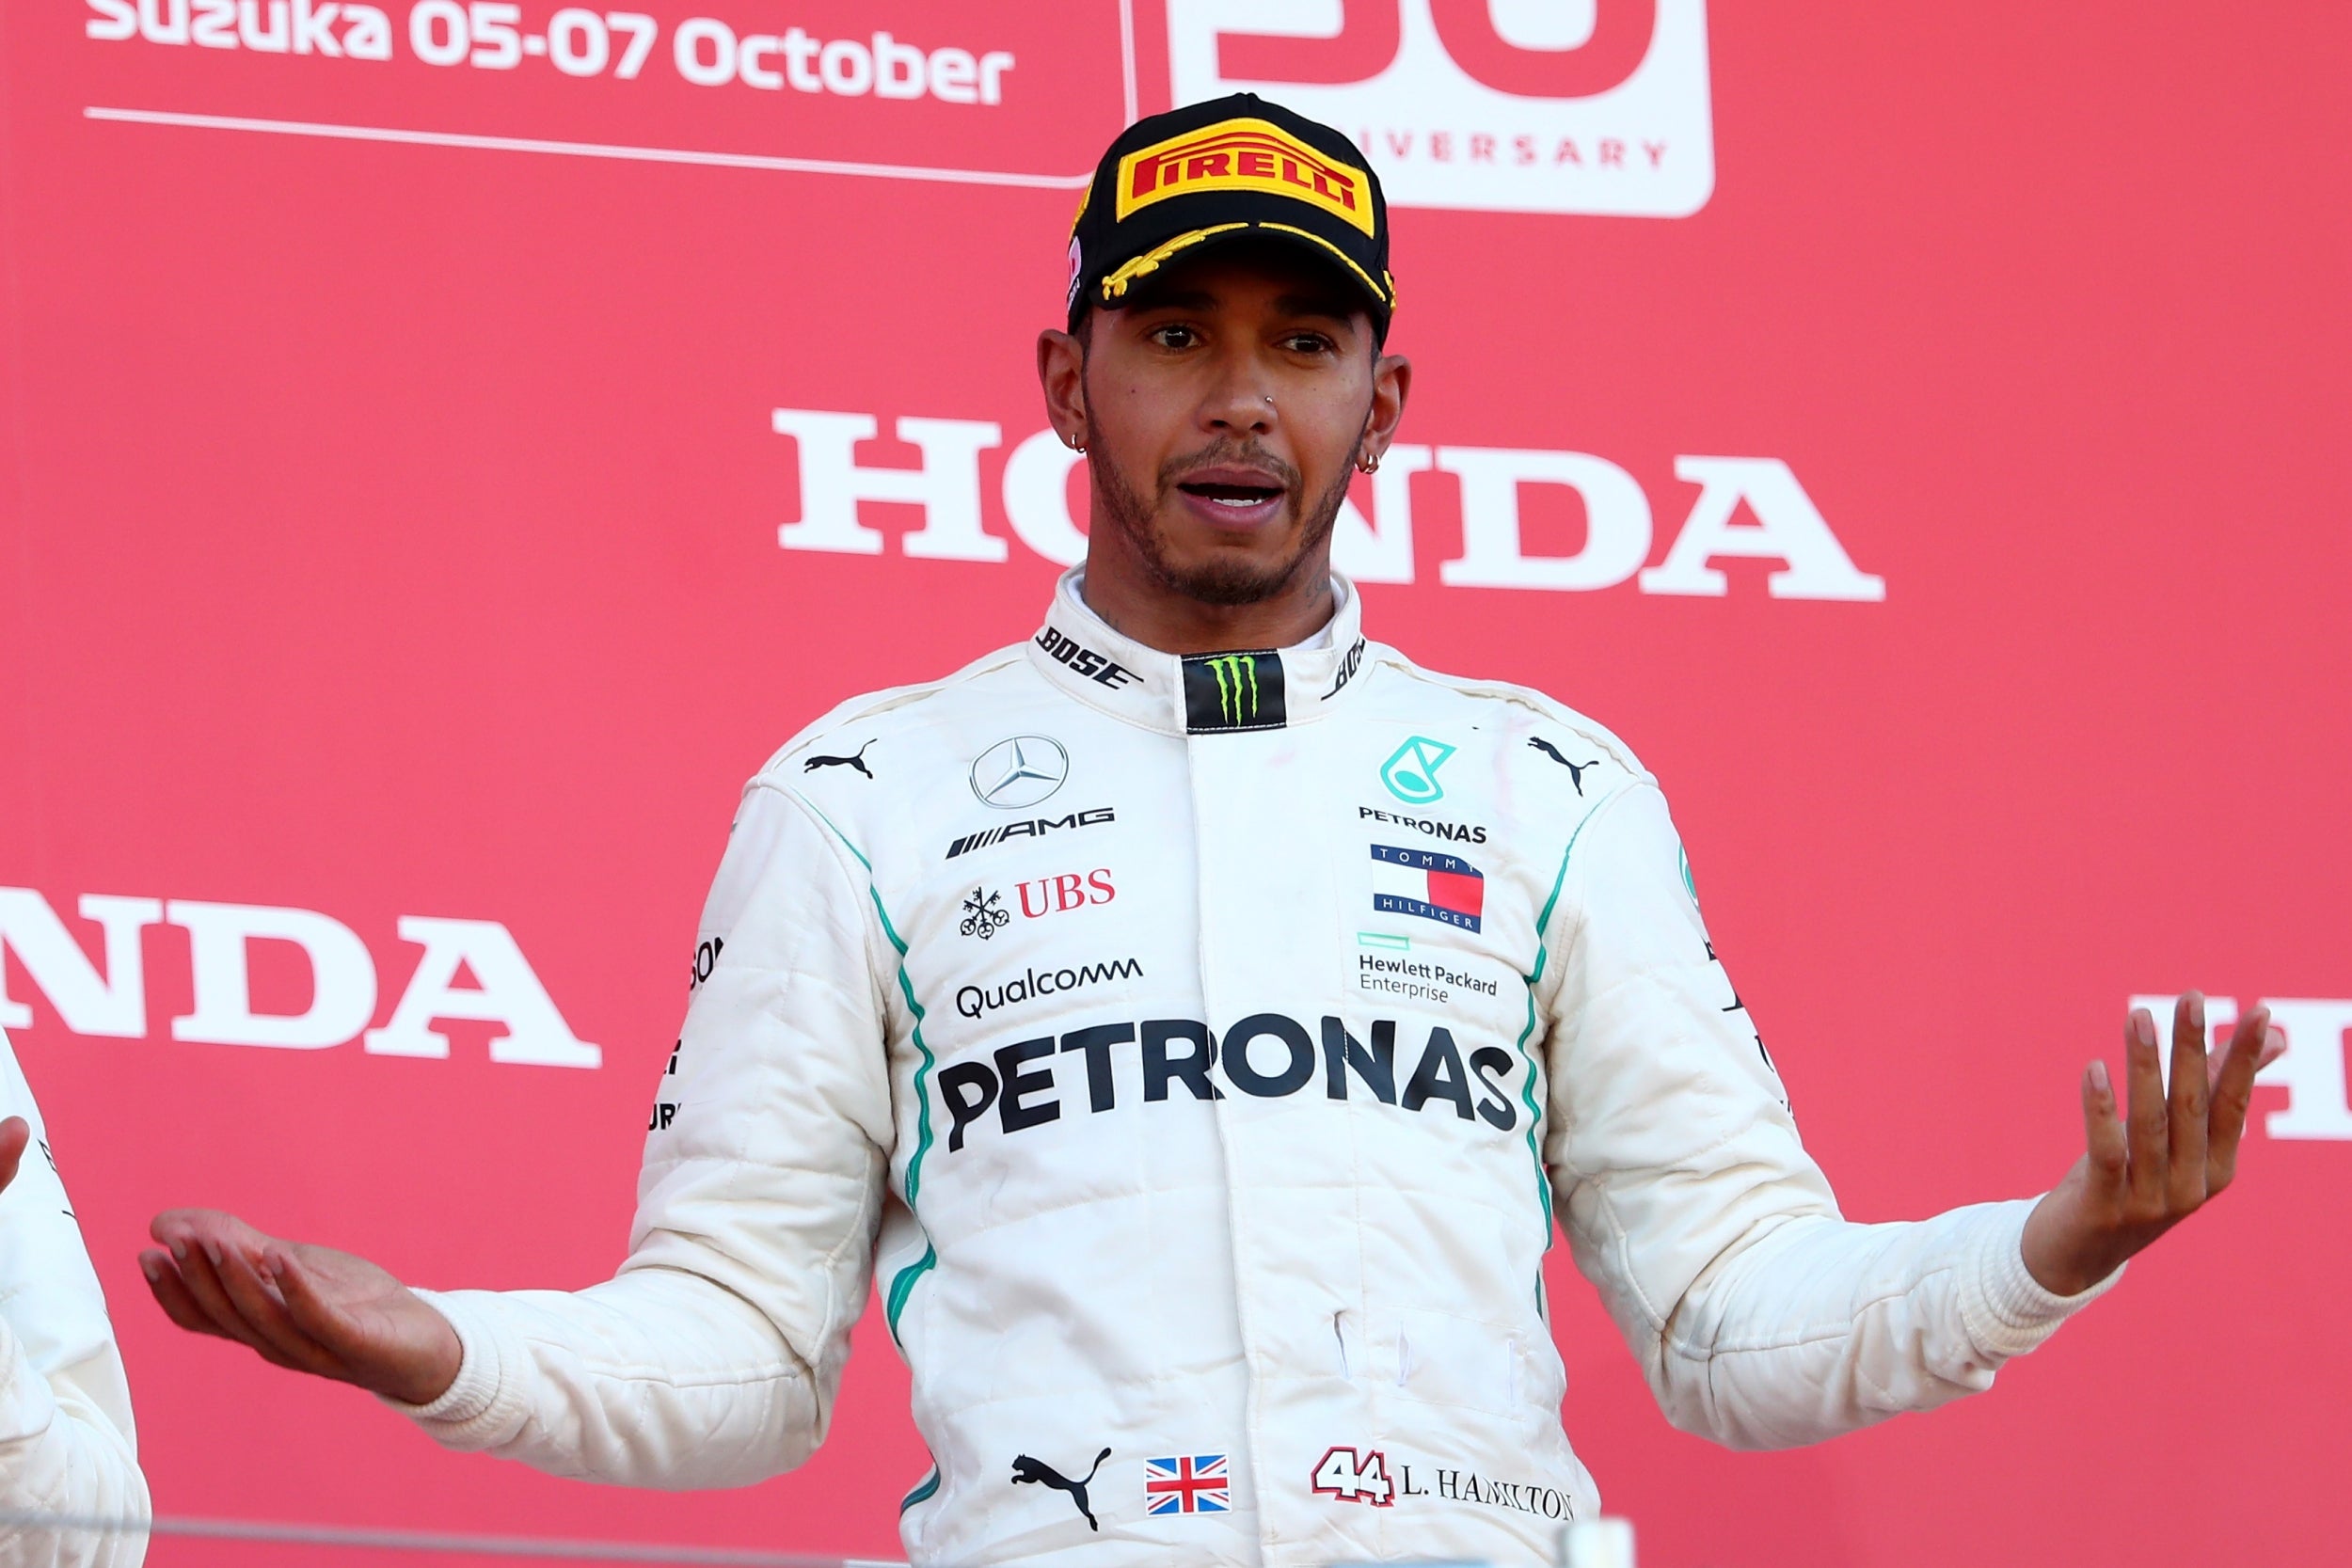 Hamilton is one win away from a fifth world title (Getty)